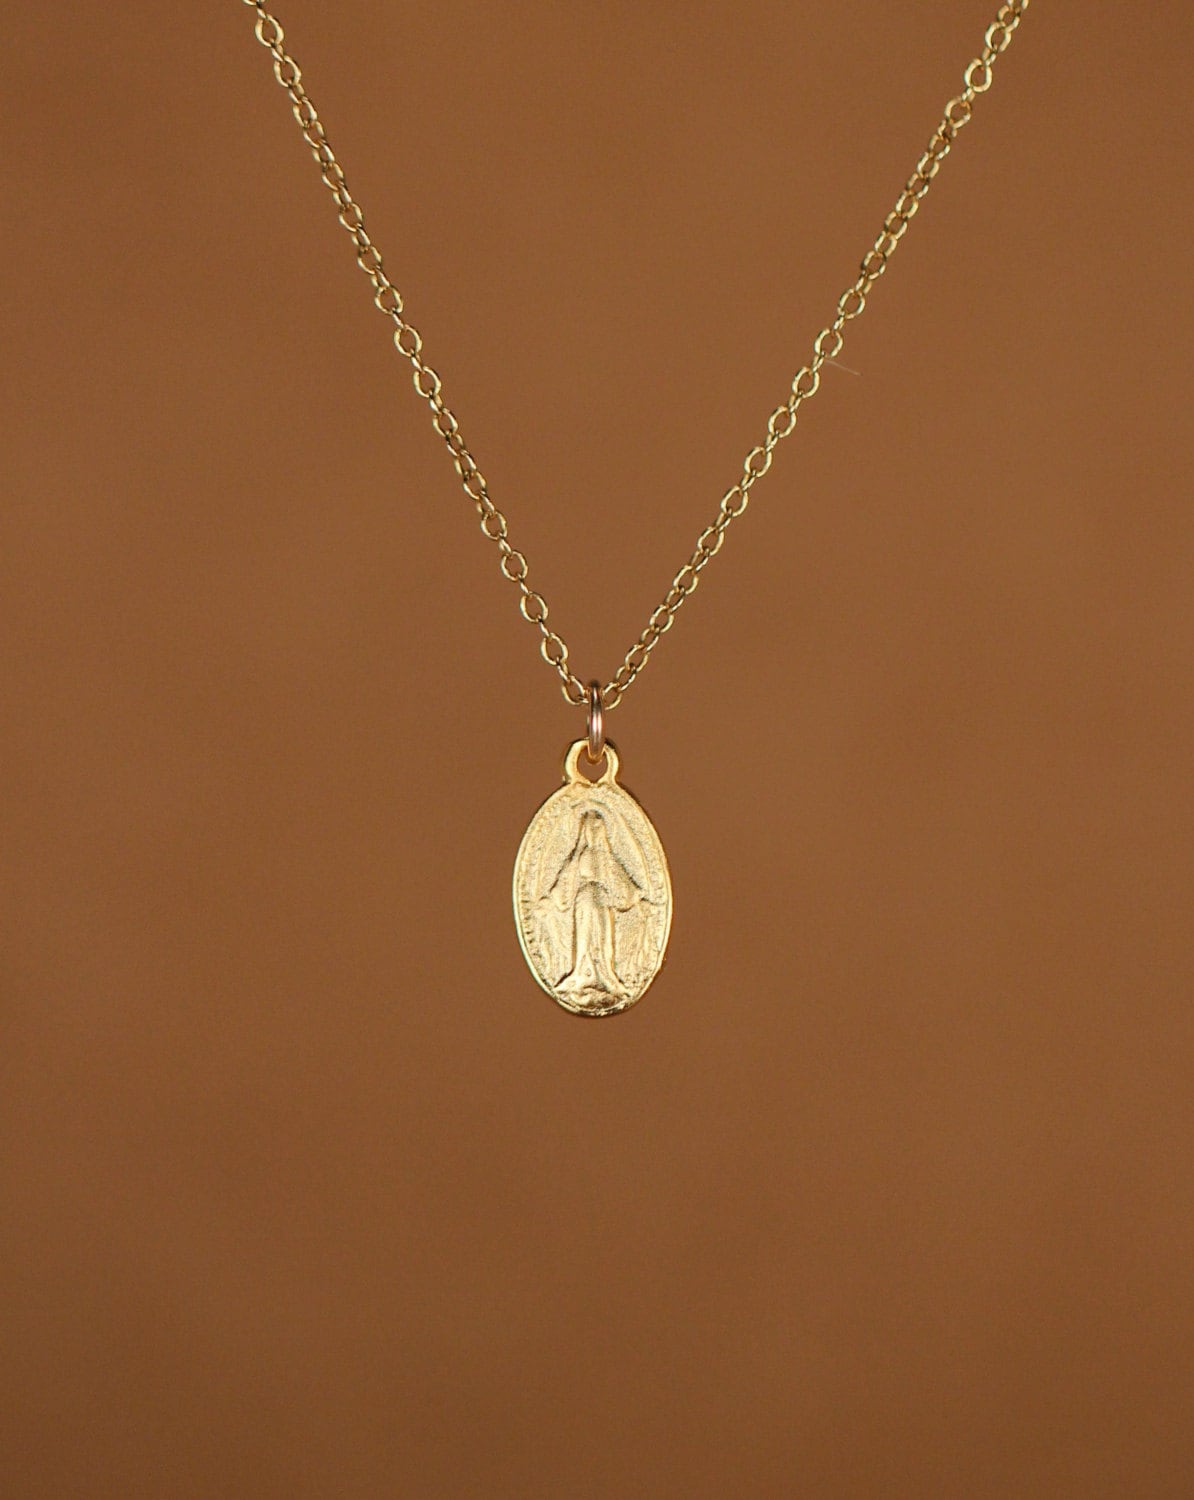 Nofade Silver Gold Virgin Mary Necklace for Women Men 18K Gold Plated  Miraculous Medal Oval Pendant Necklace Catholic Religious Christian Jewelry  | Amazon.com